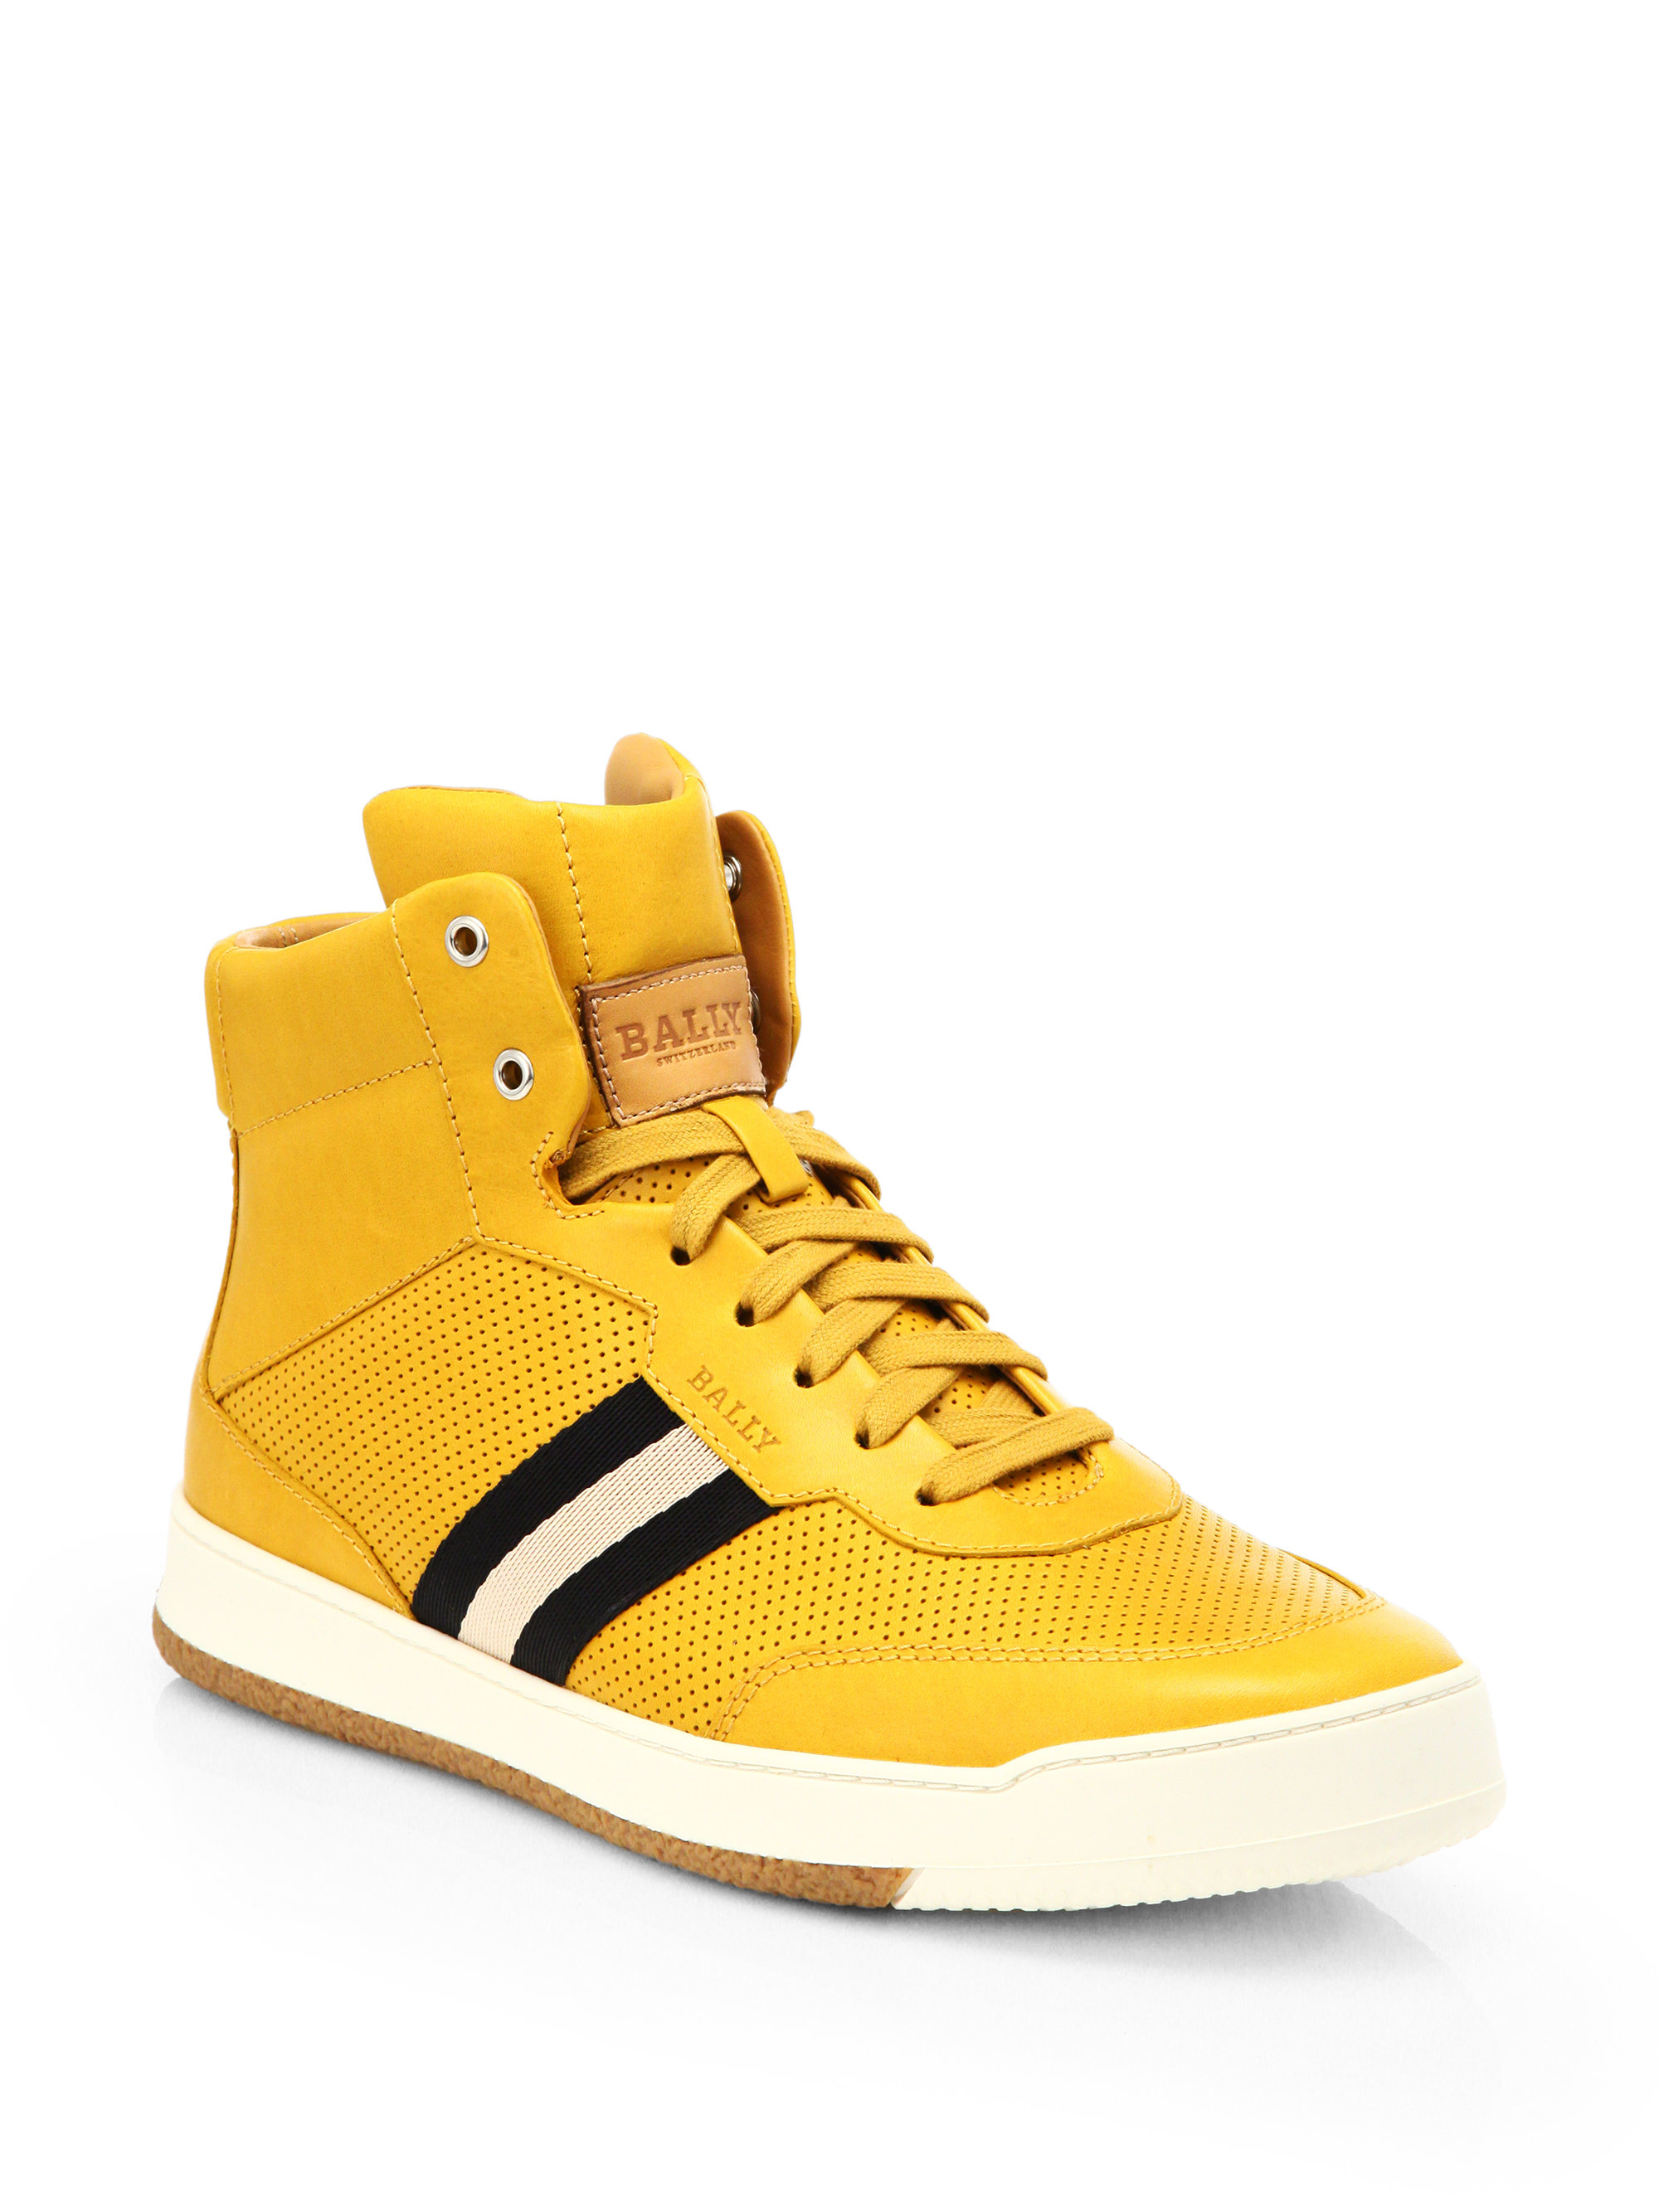 bally yellow shoes